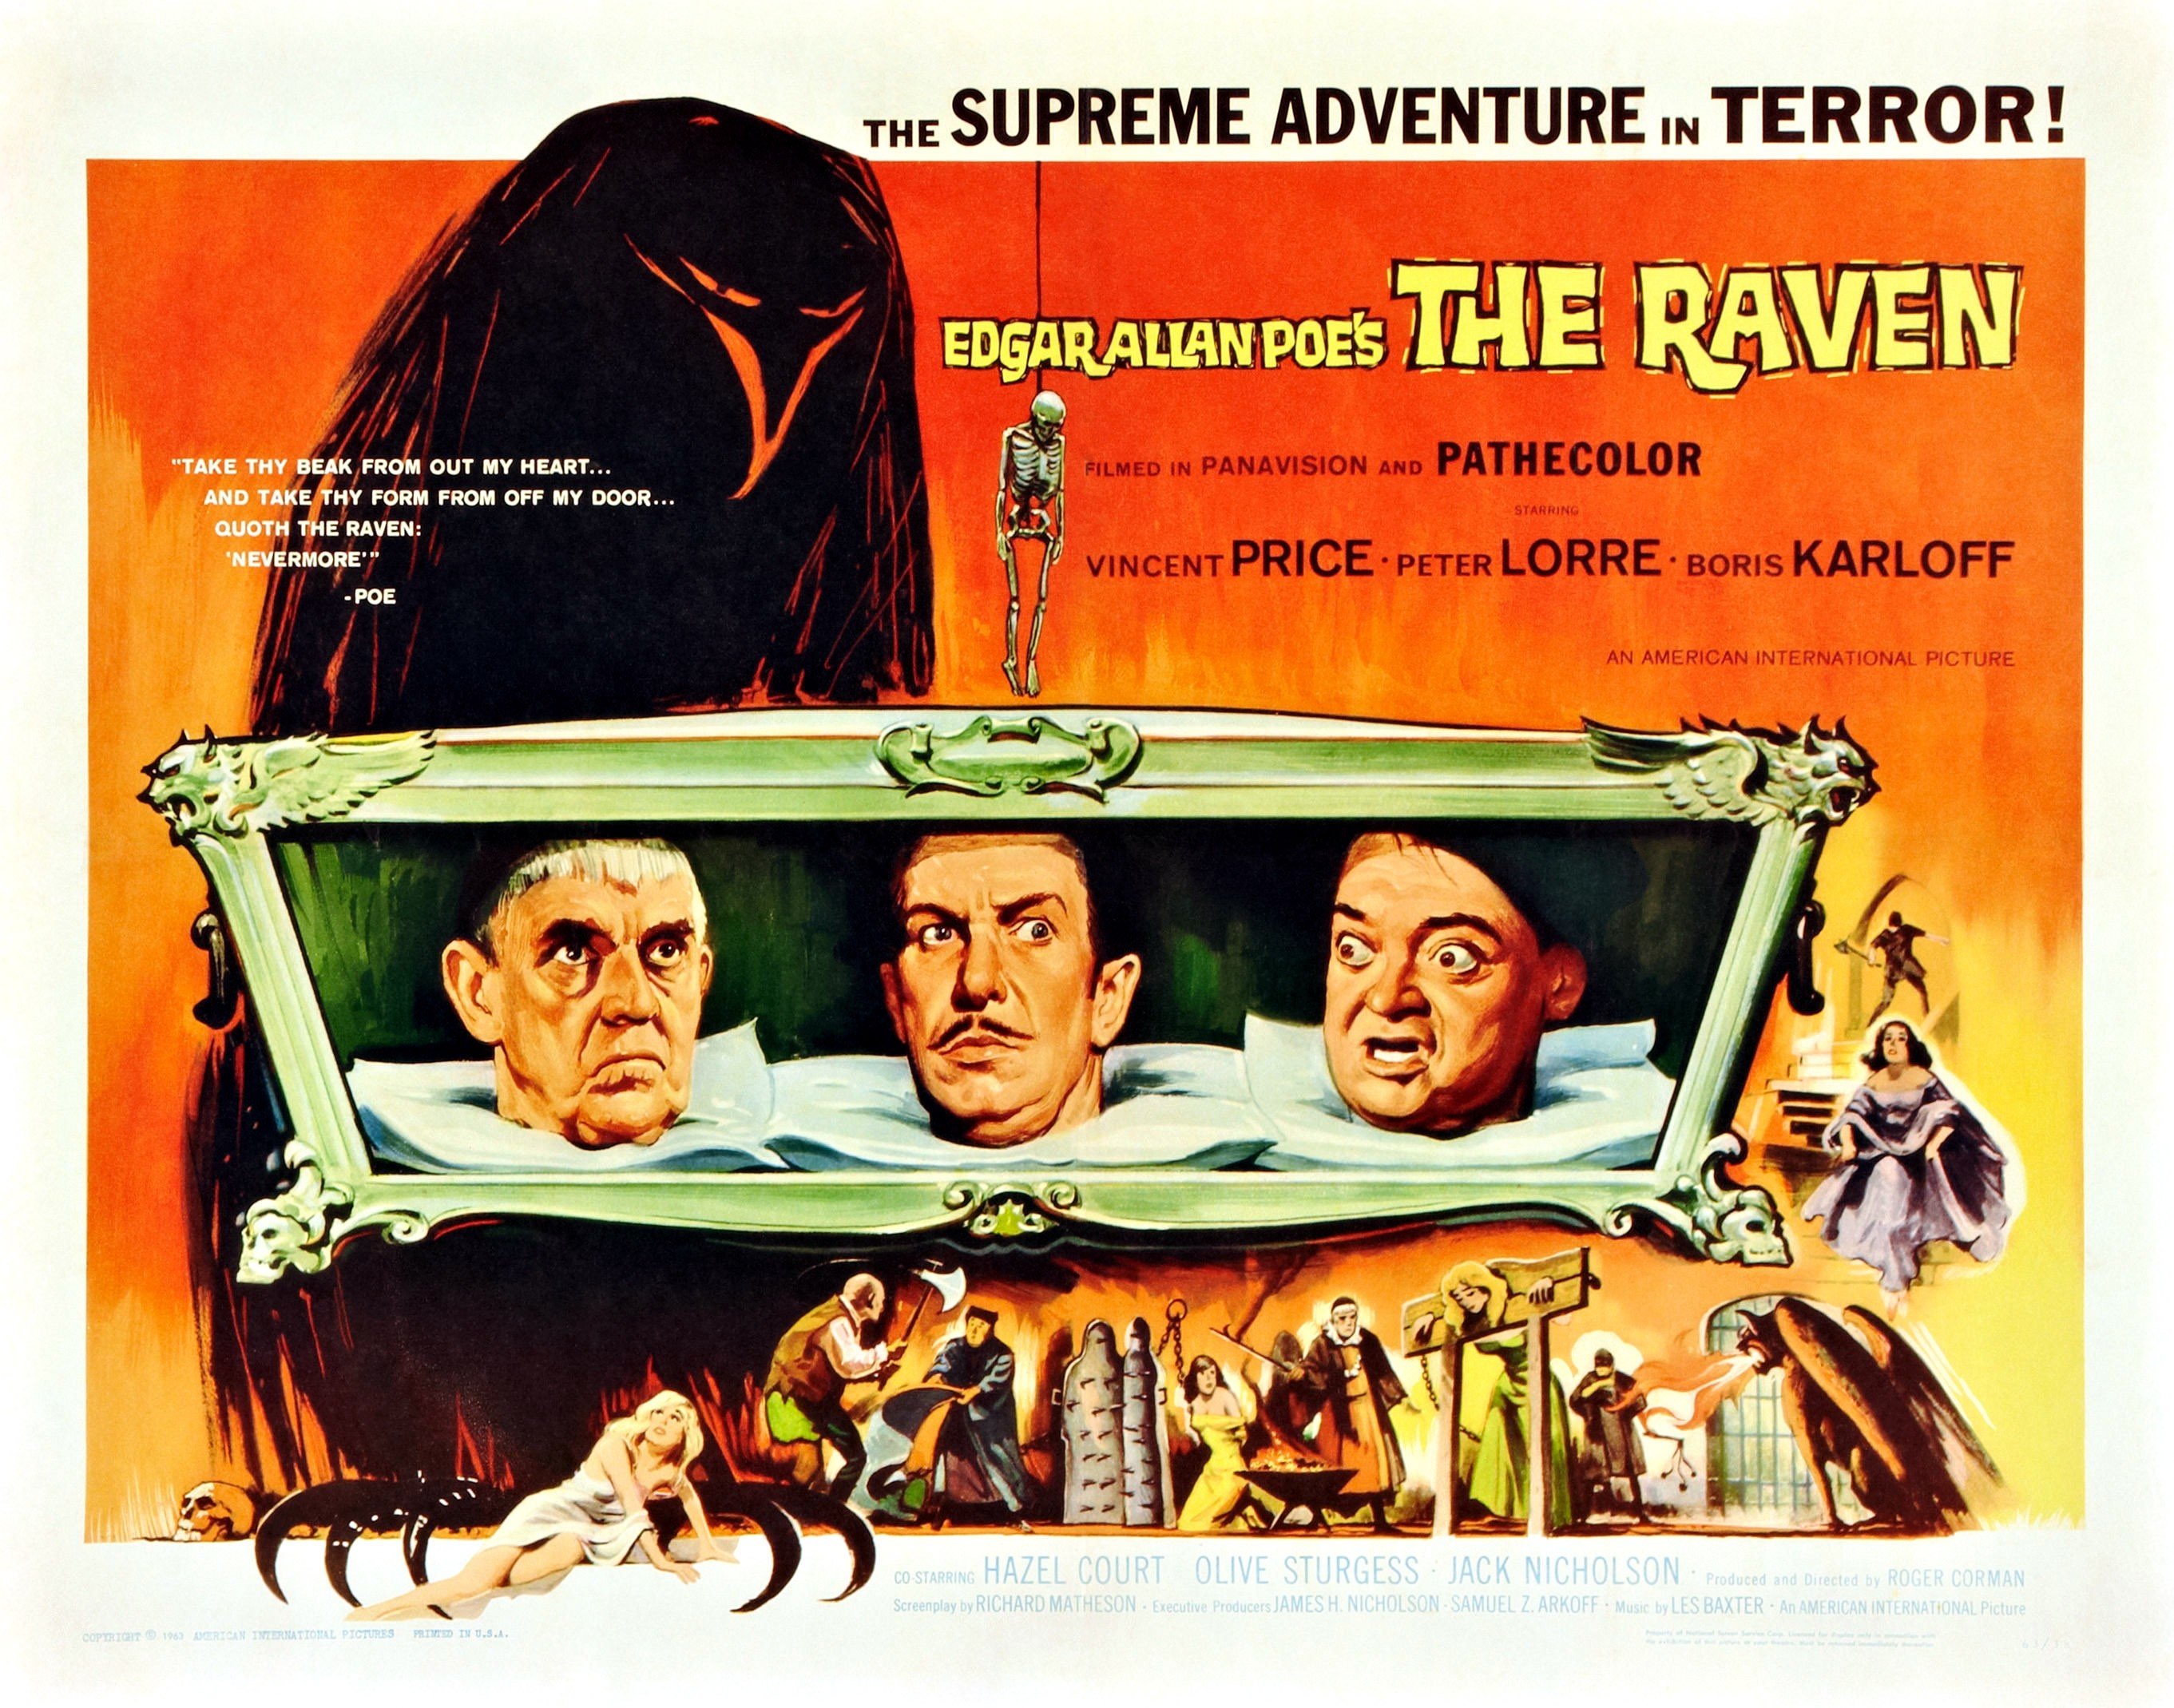 Lobby card for the 1963 movie 'The Raven' with Vincent Price, Boris Karloff, and Peter Lorre